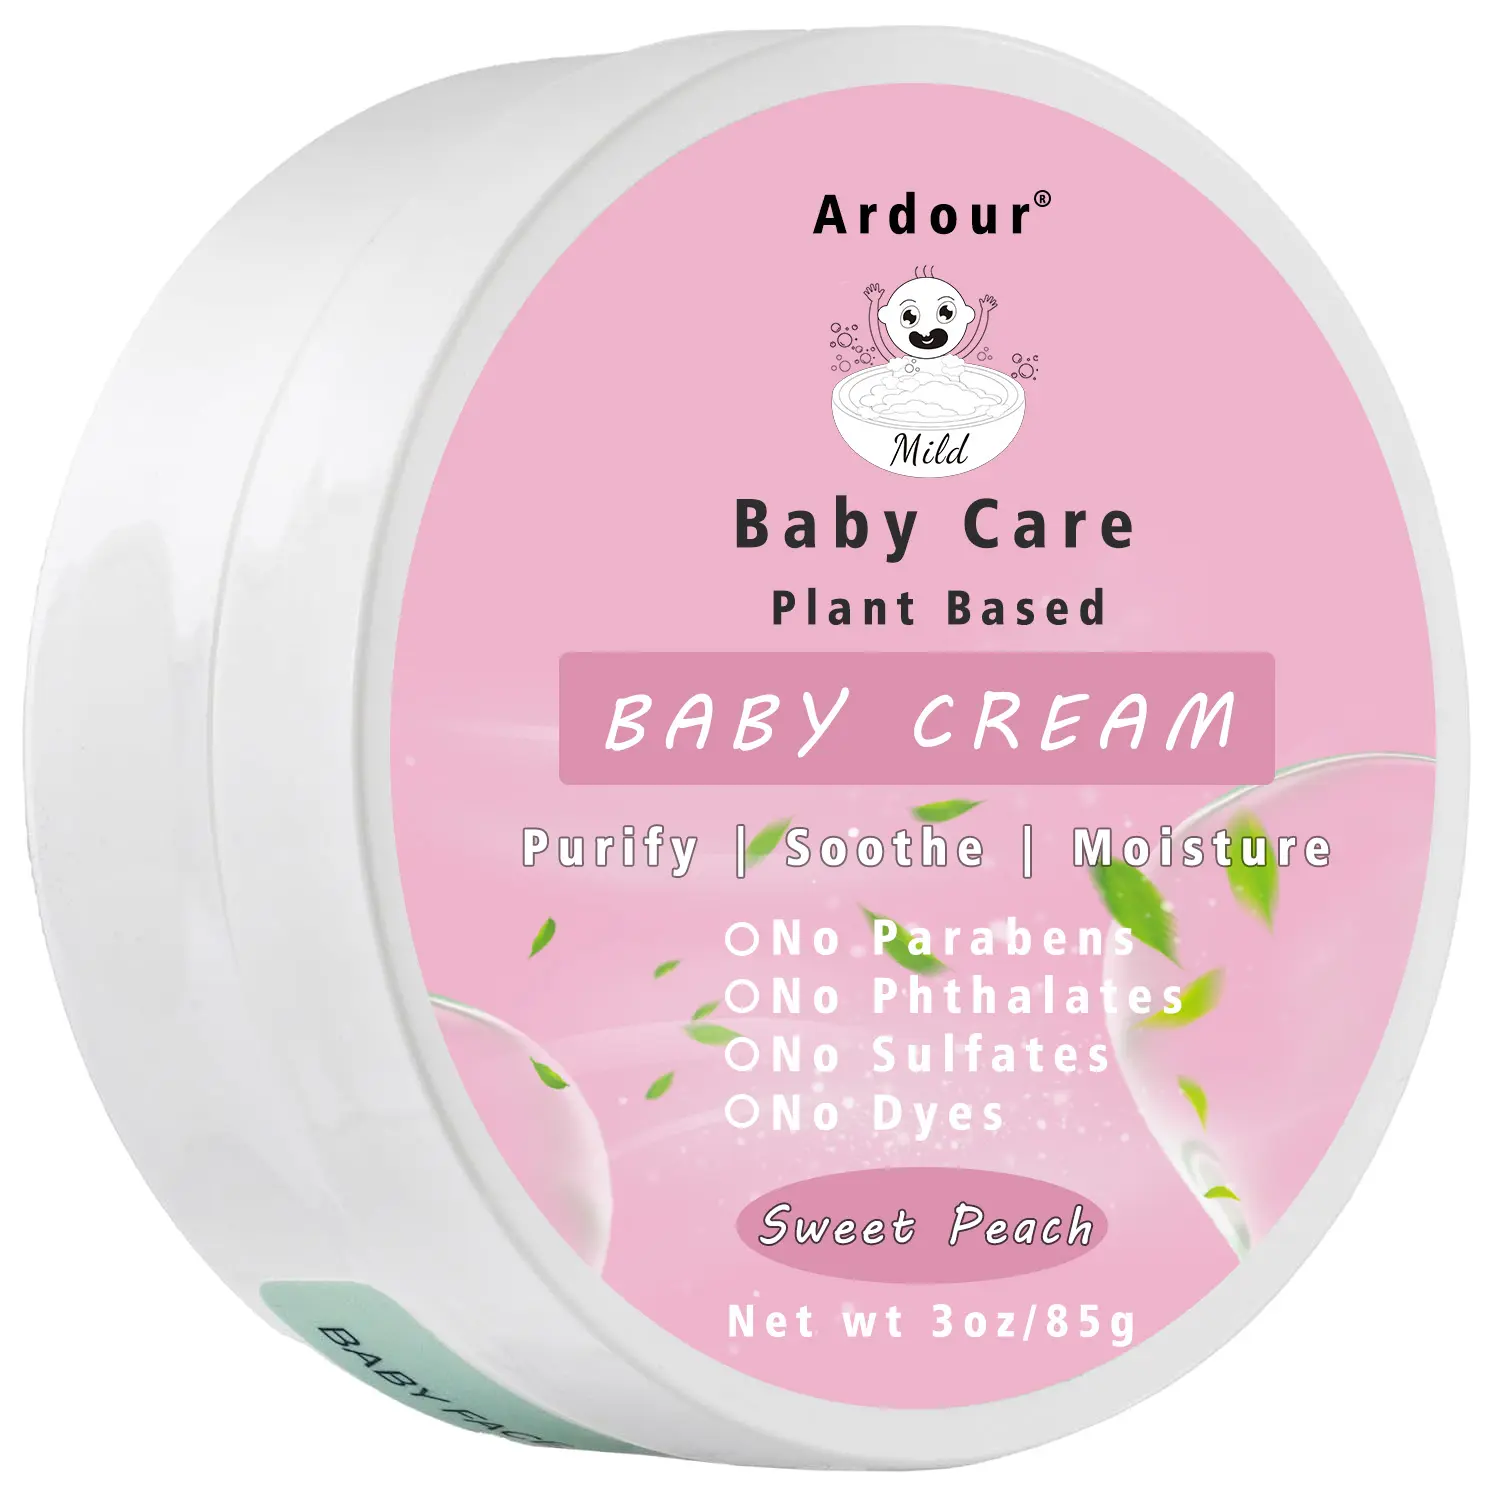 Sweet Peach Baby Cream Lotion For Babies Kids Children Newborn Infants Gentle For Baby Body And Face Skin Care Butter Balm